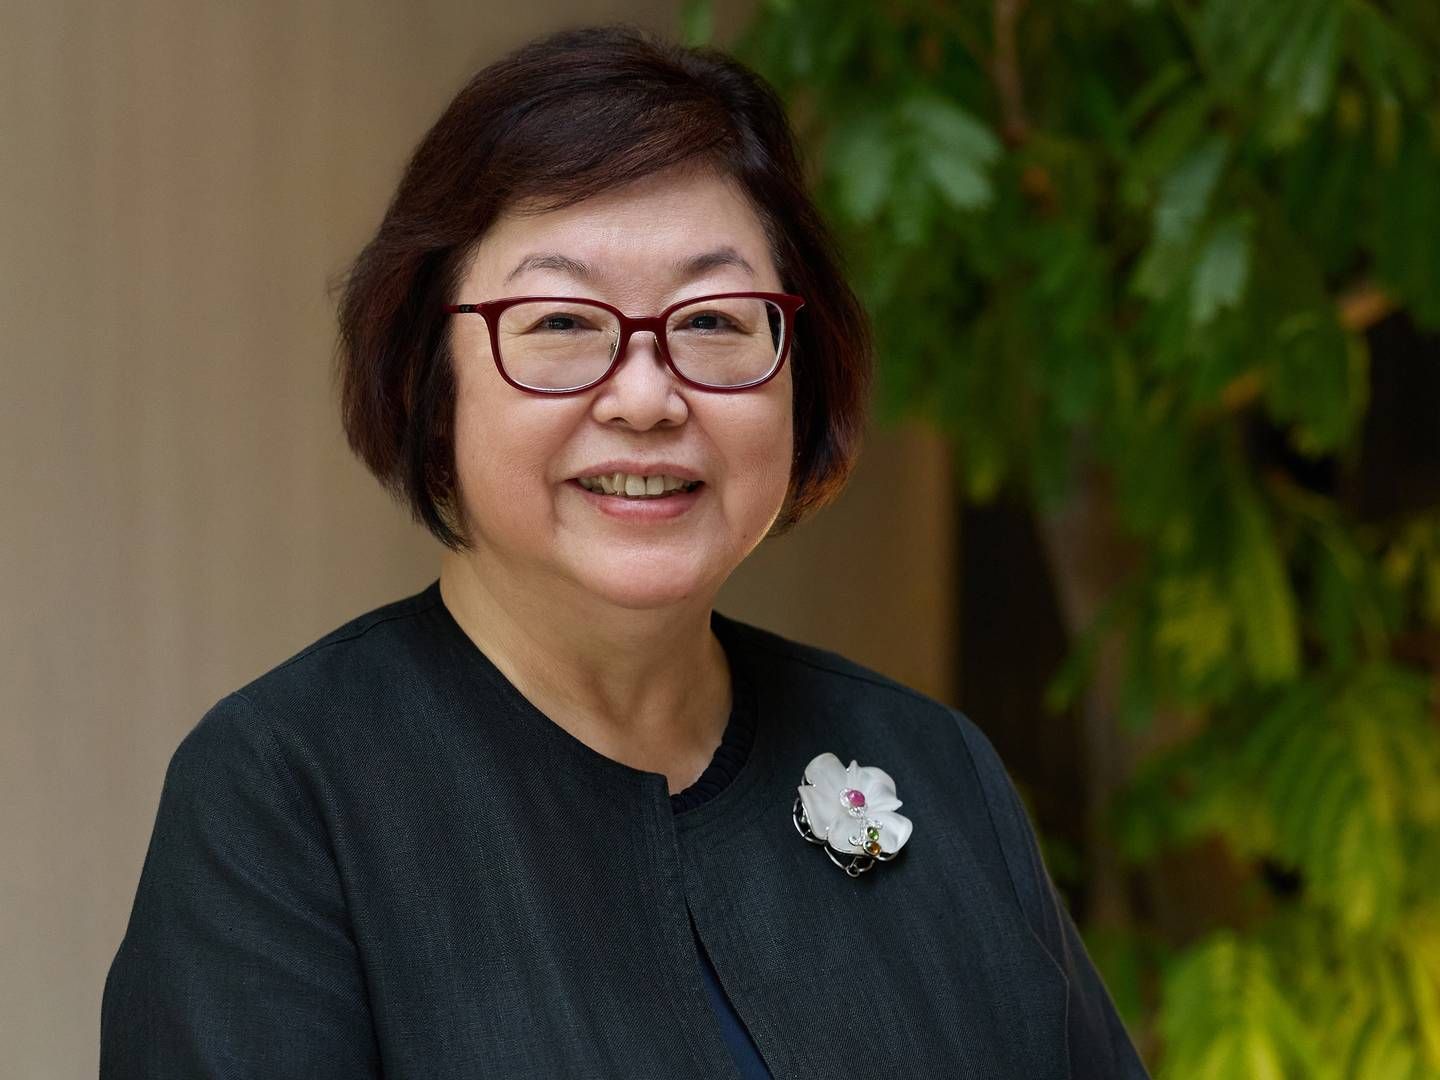 "Shipping is a sector where the relationships formed amongst the community are actually very strong. We become friends, so we laugh together, we joke together. At the same time, when we hear the passing on of a friend, we all feel sad about it," says Executive Director, SMF, Tan Beng Tee | Foto: Celestia Tan